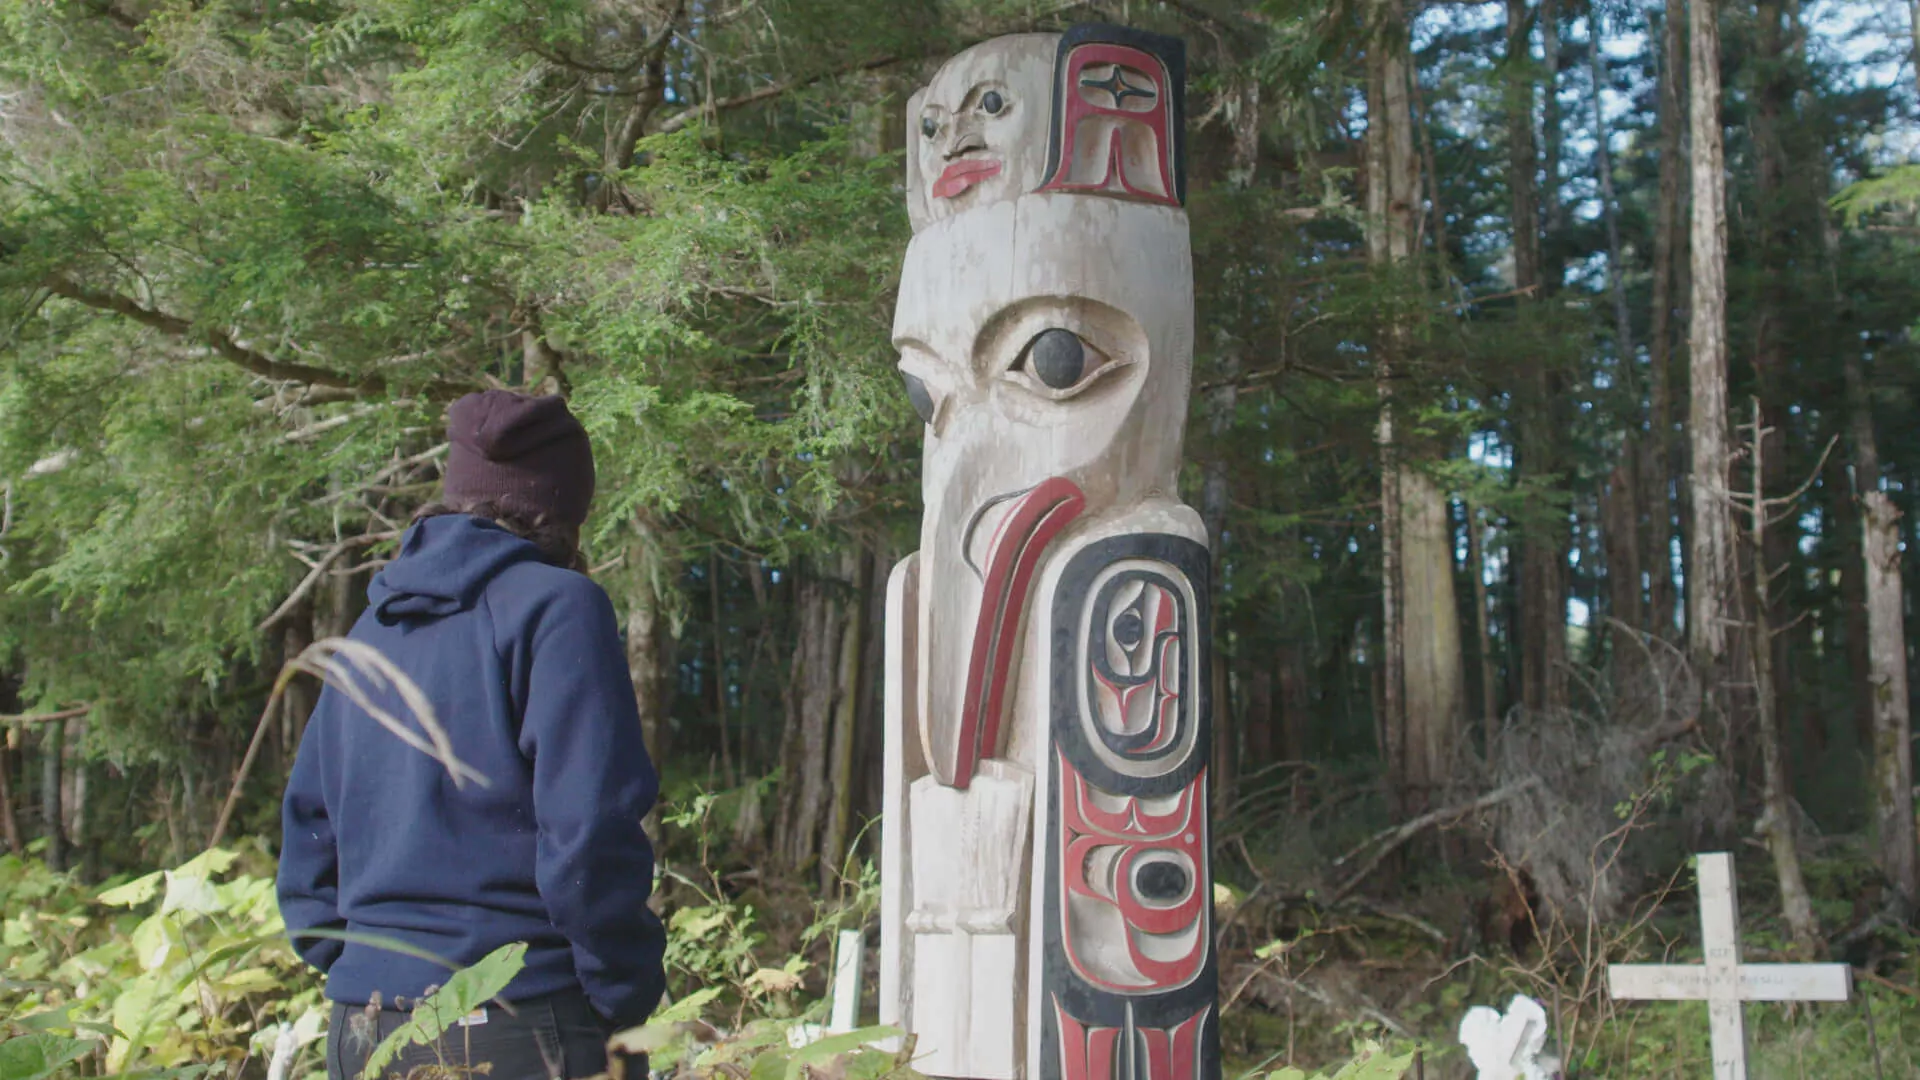 A lone traveller examines a large totem statue in a forest, painted in white, red, and black. (Skindigenous Season 3)